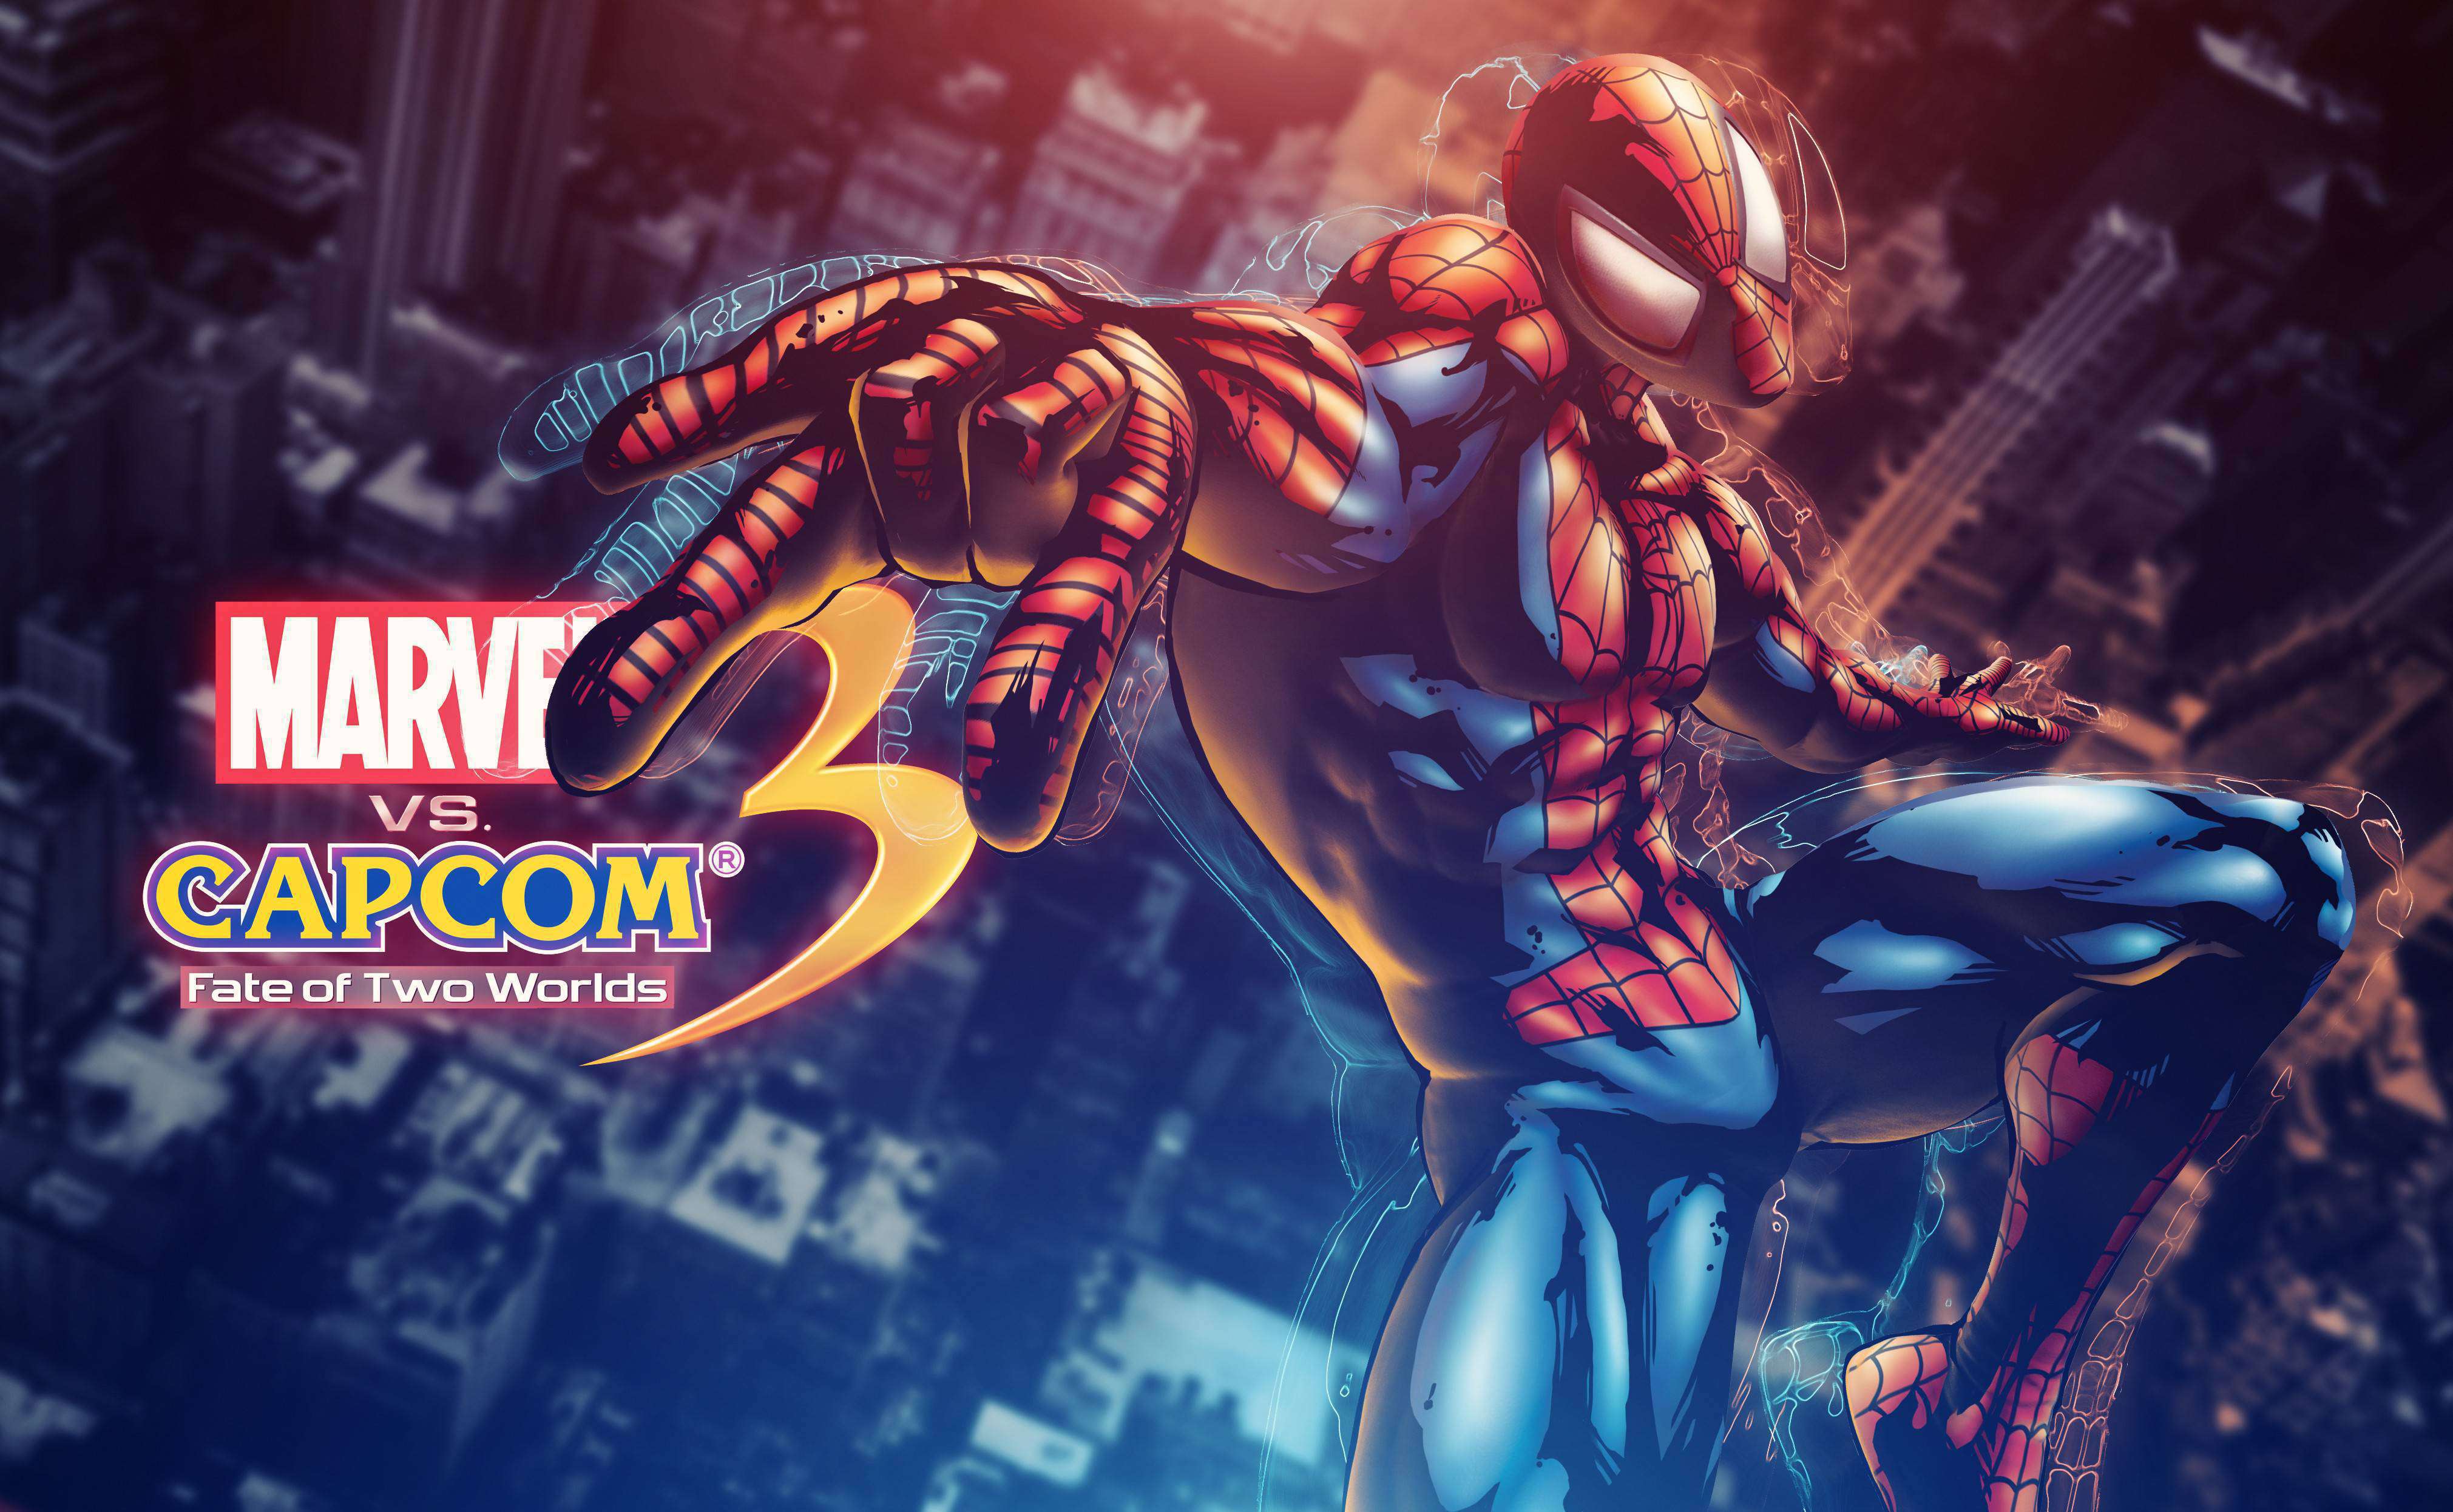 video game, marvel vs capcom 3: fate of two worlds, spider man